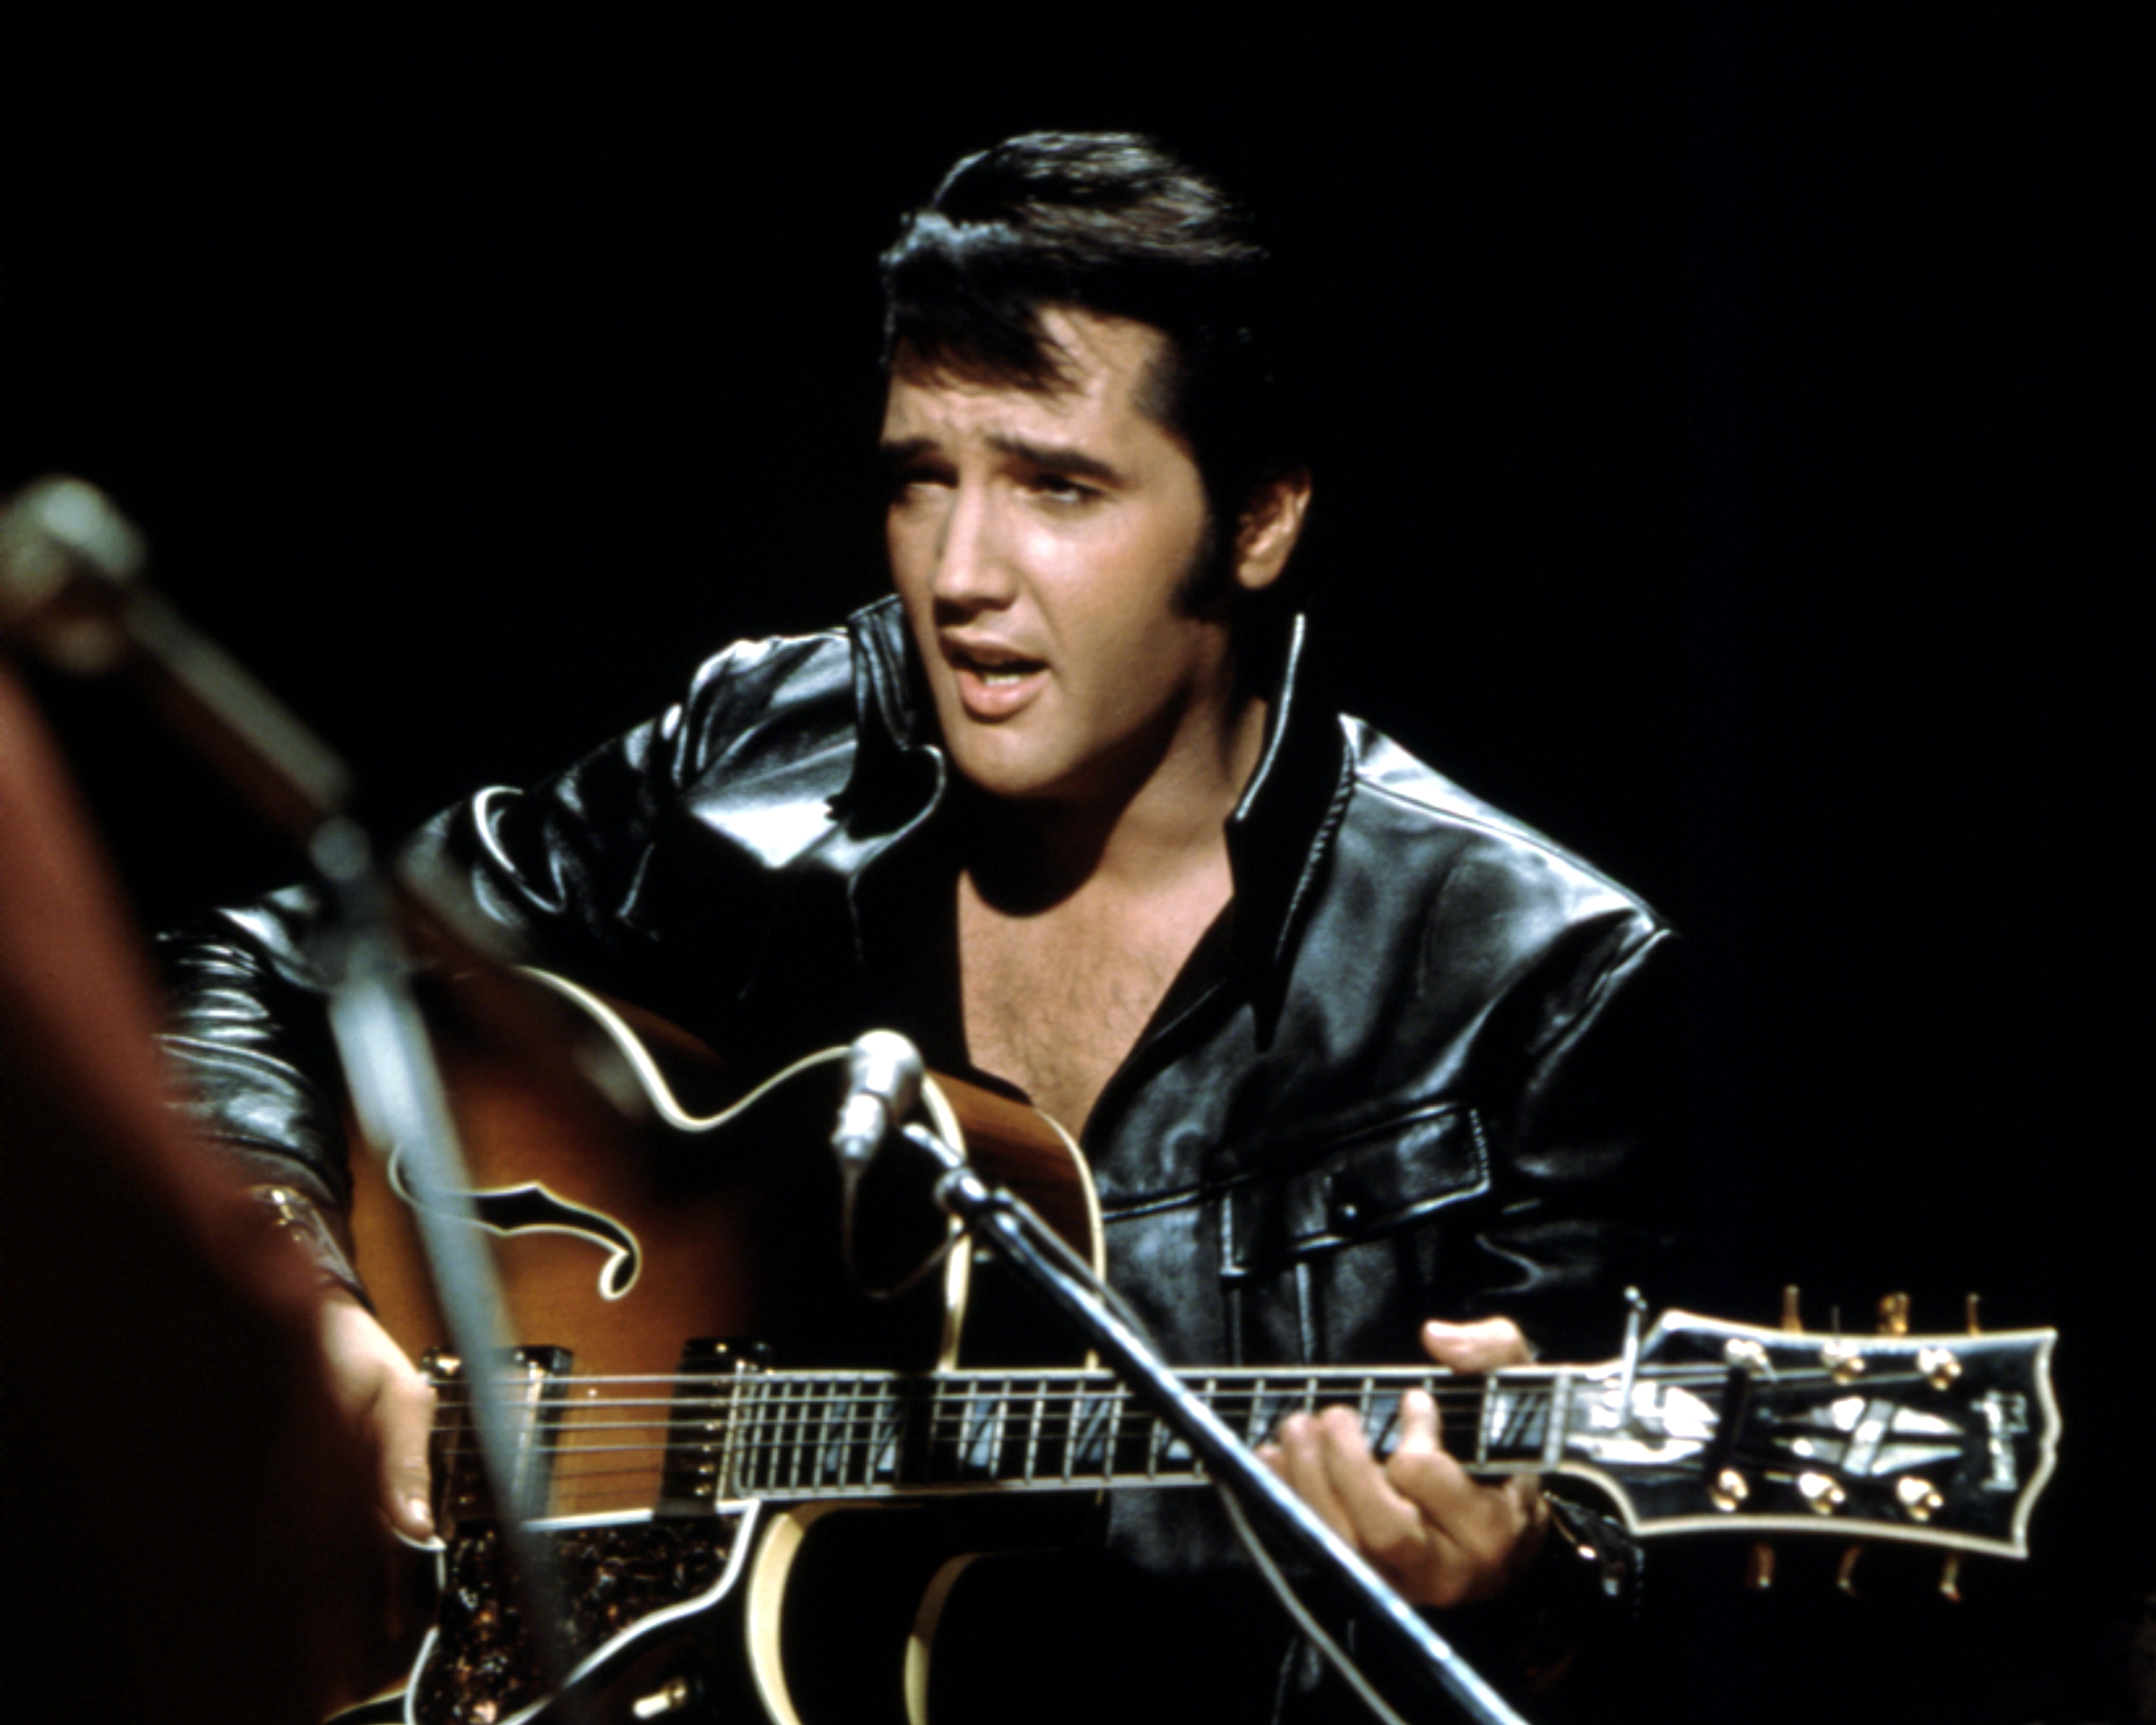 Elvis Presley performing on the Elvis comeback TV special on on June 27, 1968. | Source: Getty Images